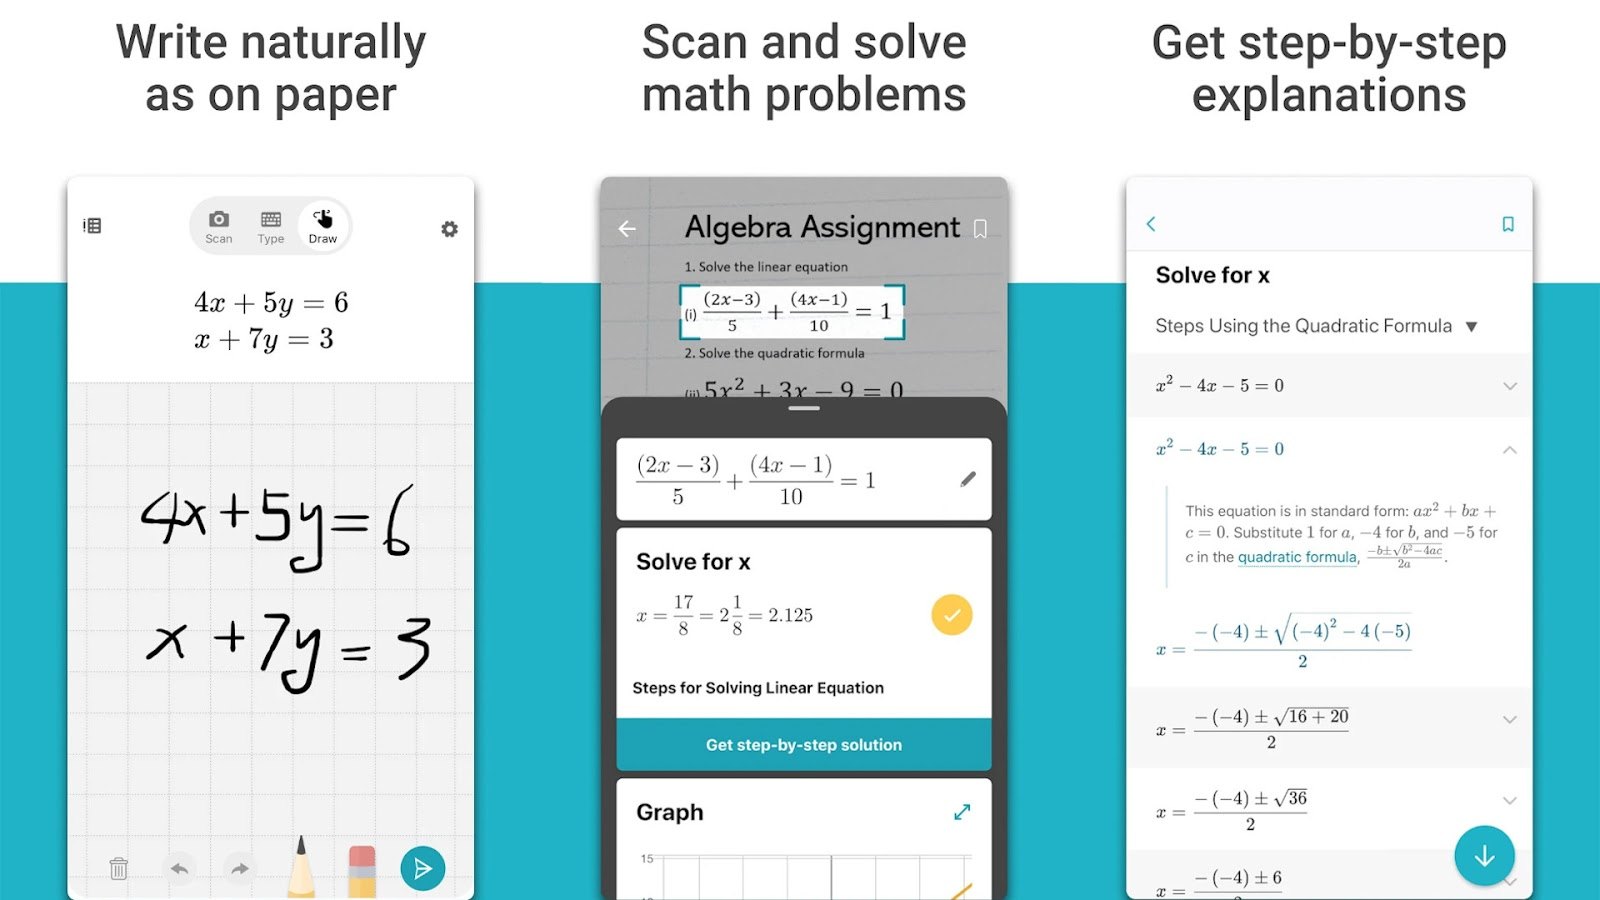 Math by Microsoft: Check Out the Microsoft Math Solver App